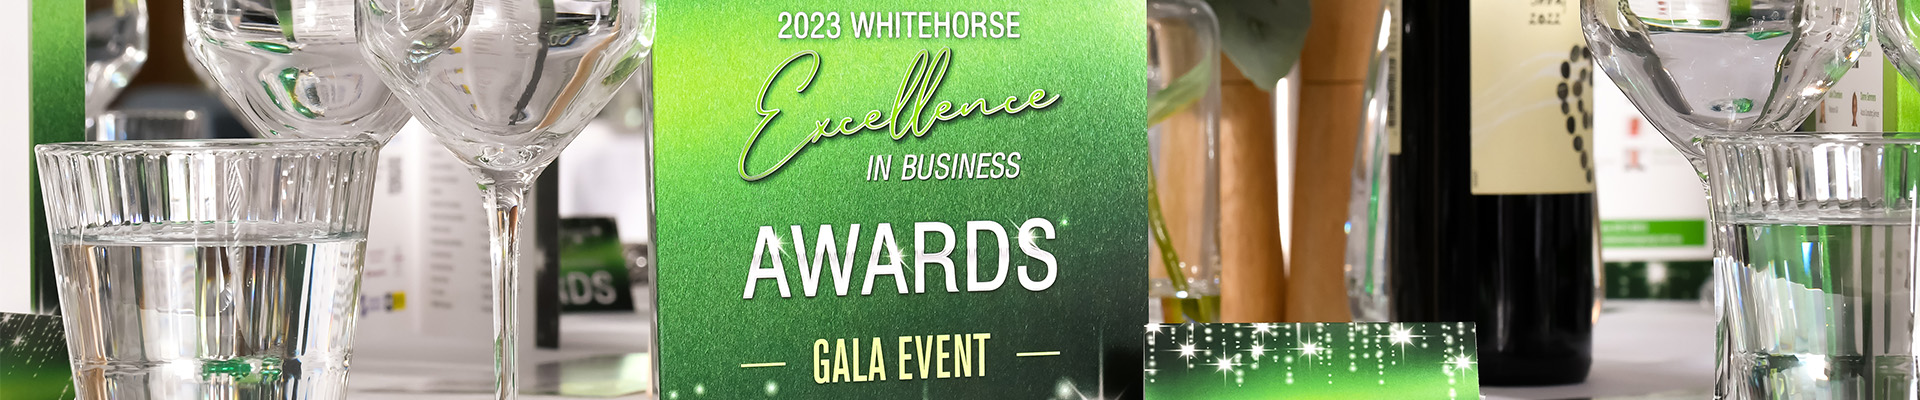 About the 2023 Whitehorse Excellence in Business Awards | Nominate now.